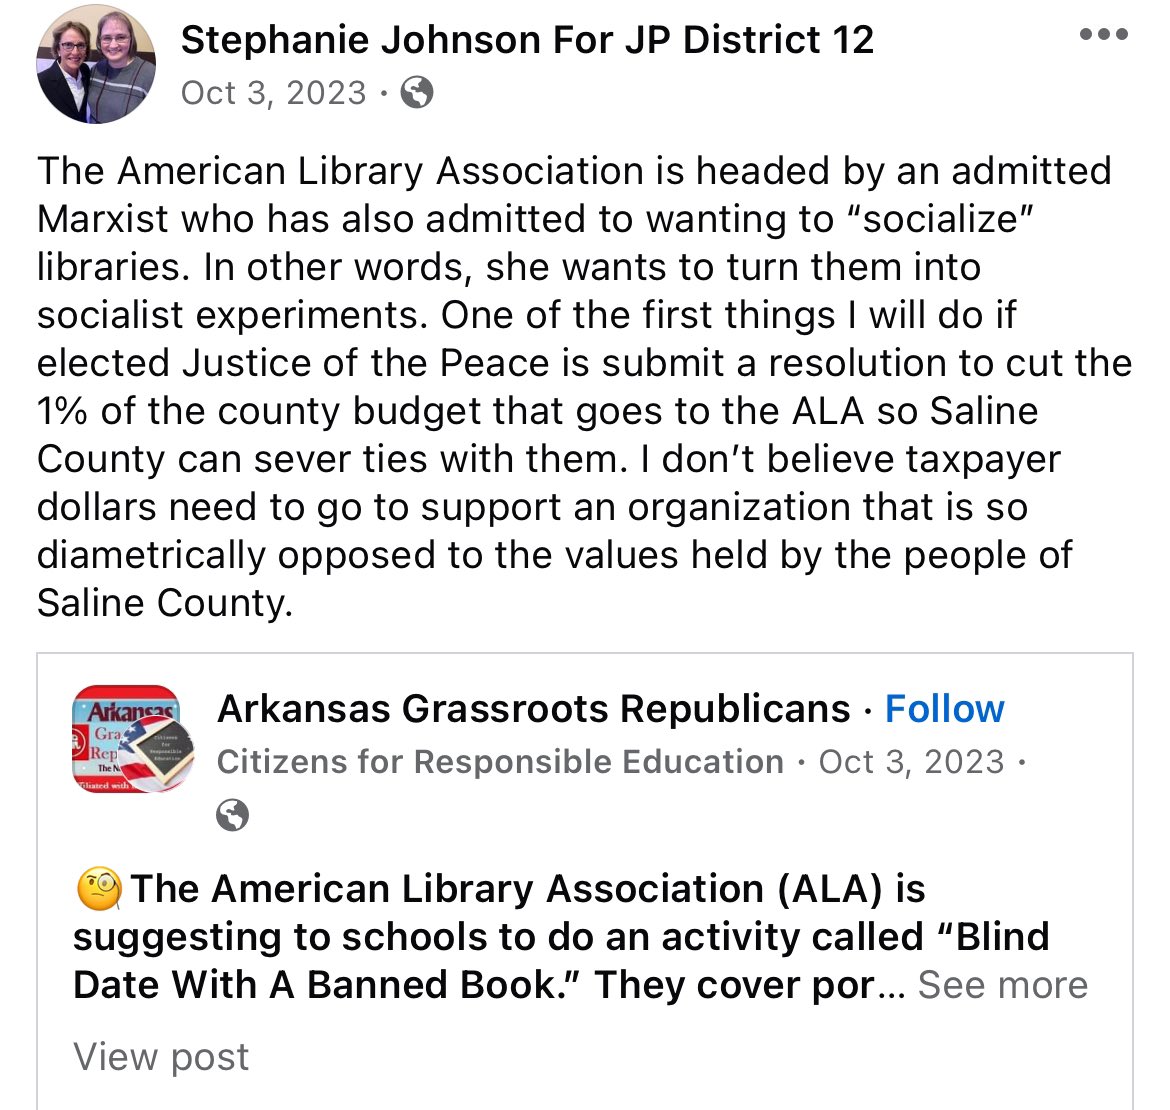 Yup. It’s official. JP Stephanie Johnson is cray cray, y’all. “Marxist” “Social experiments” Where’s the fucking tin foil hat???